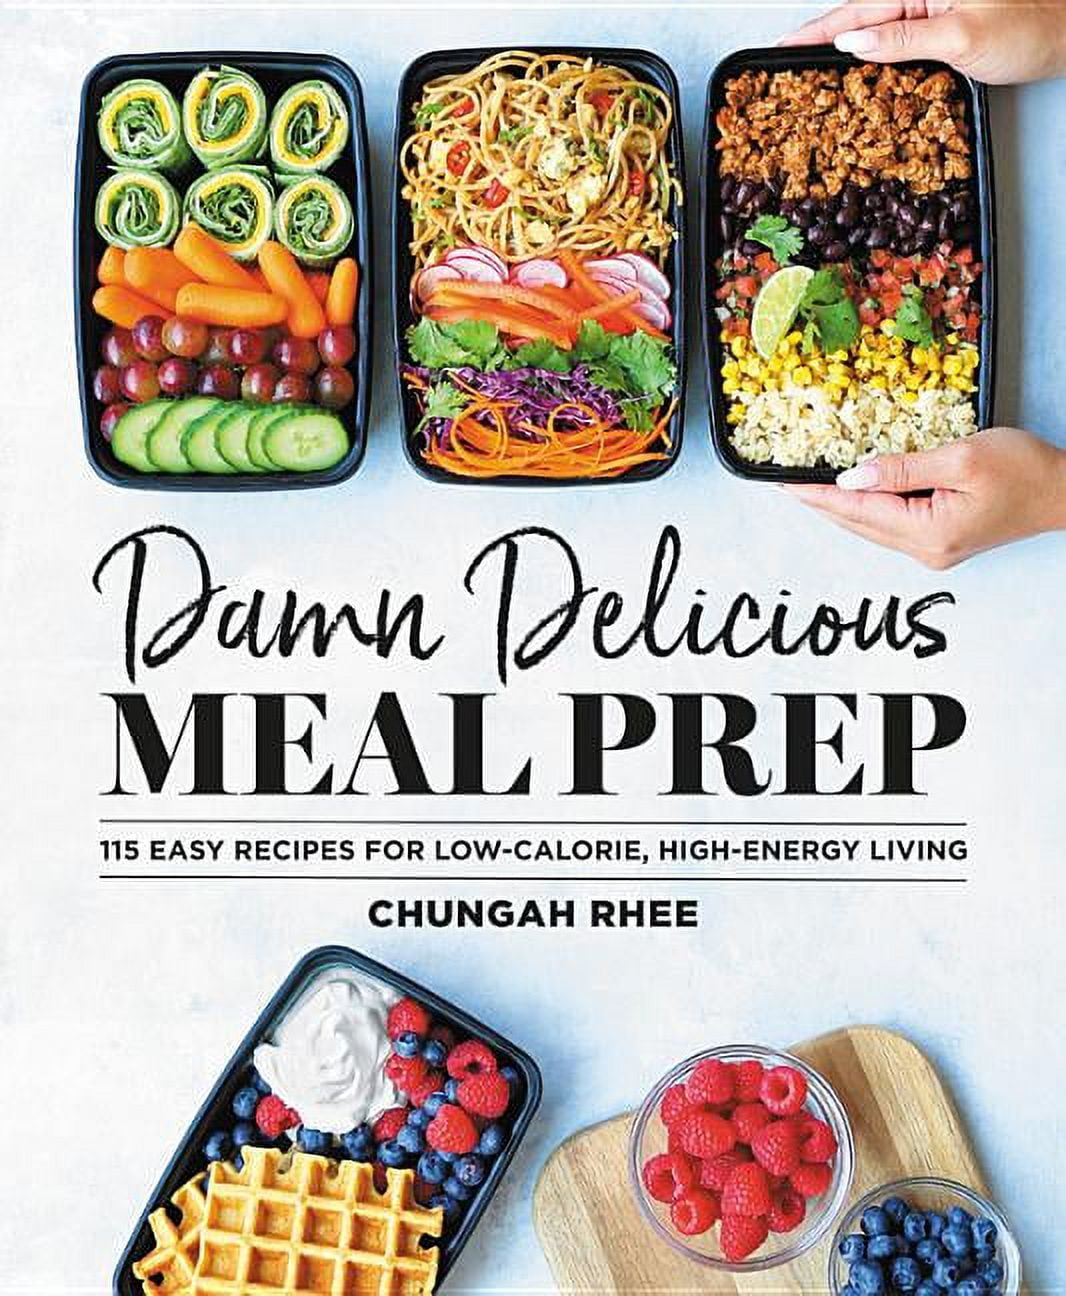 Meal Prep Ideas - Cooking Essentials Guide - Macy's